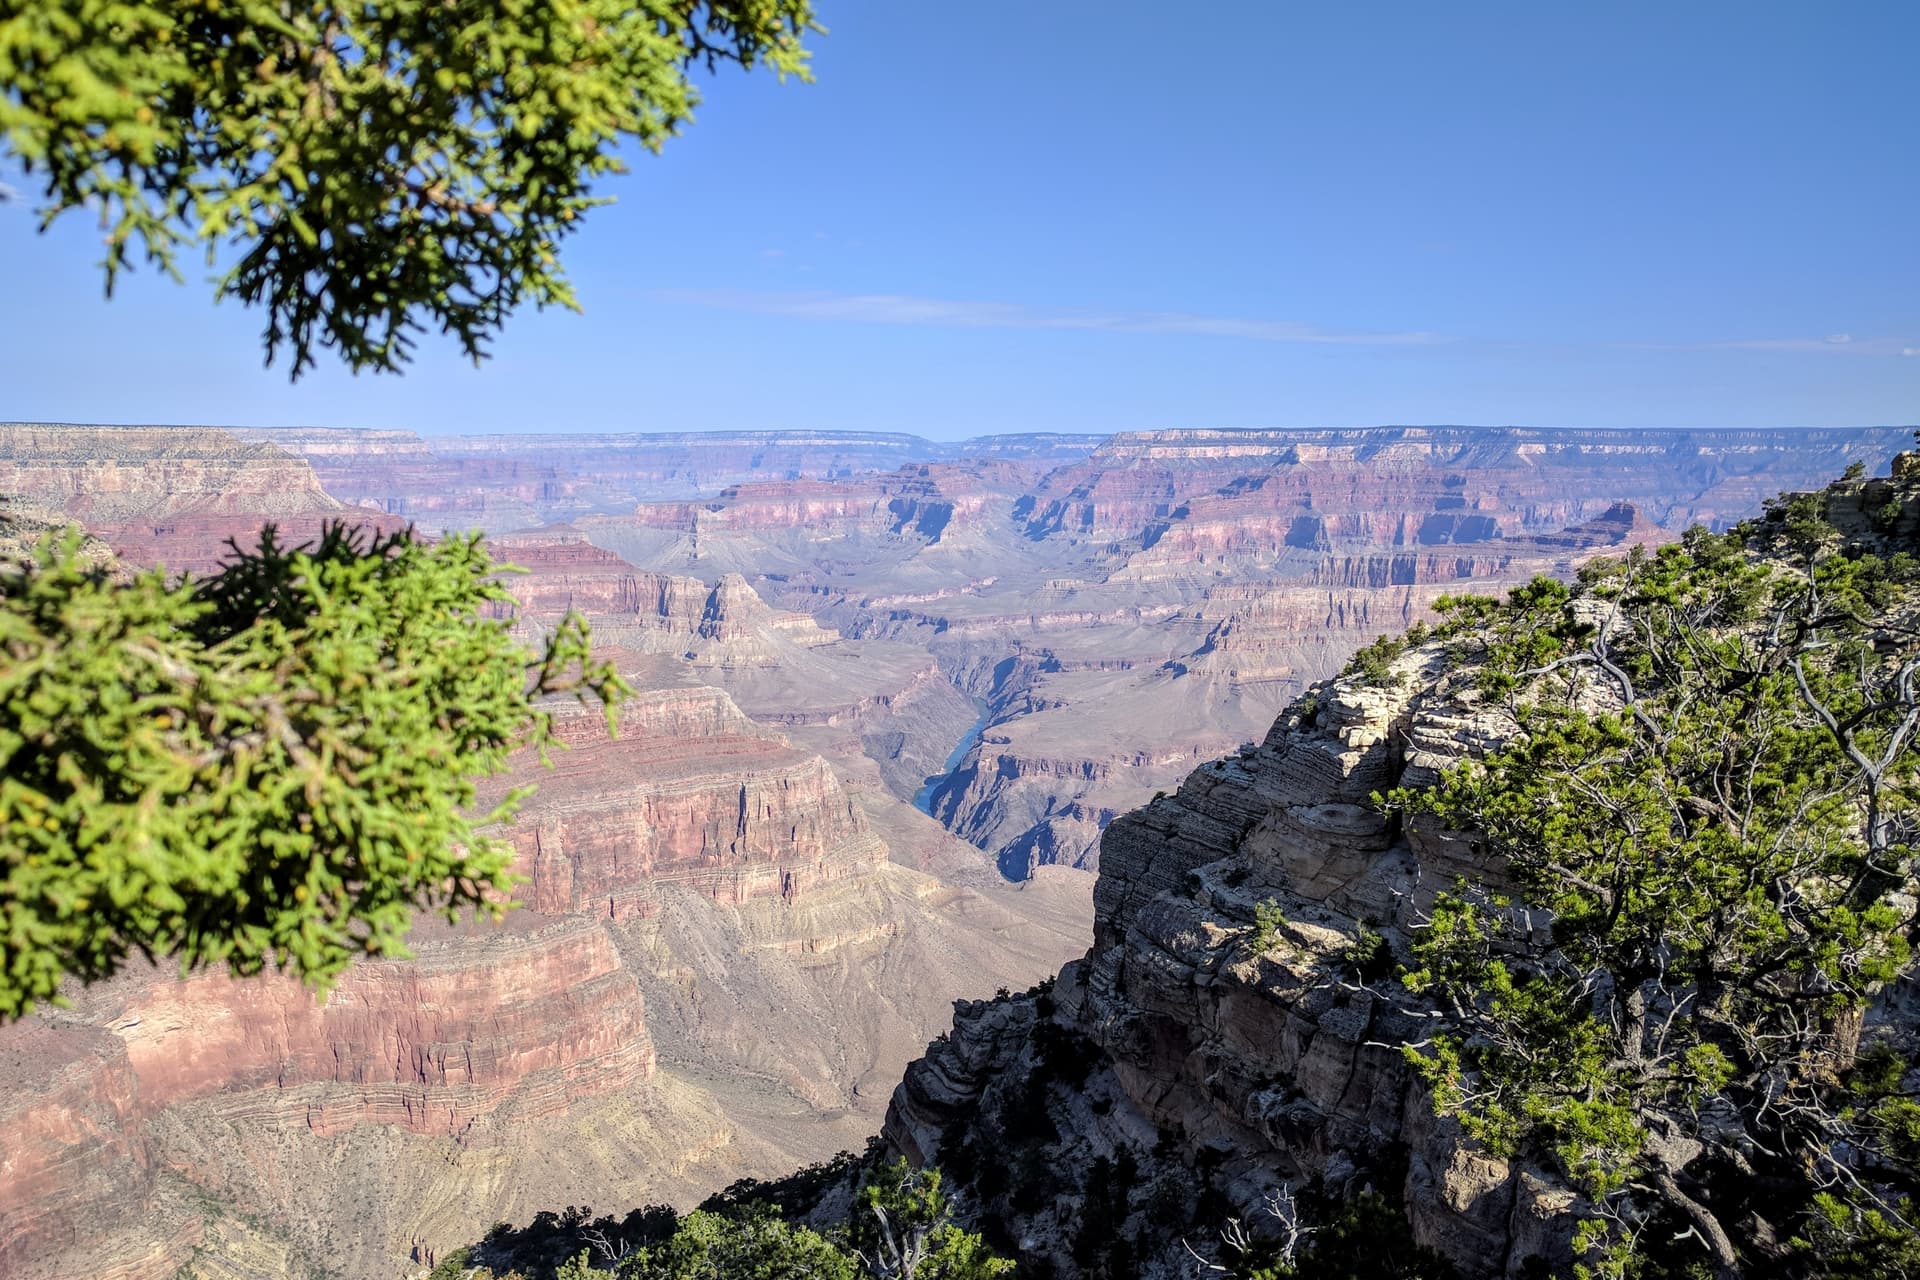 A view into the Grand Canyon from the South Rim. The Colorado River is barely visible in a steep gorge near the center of the Canyon.